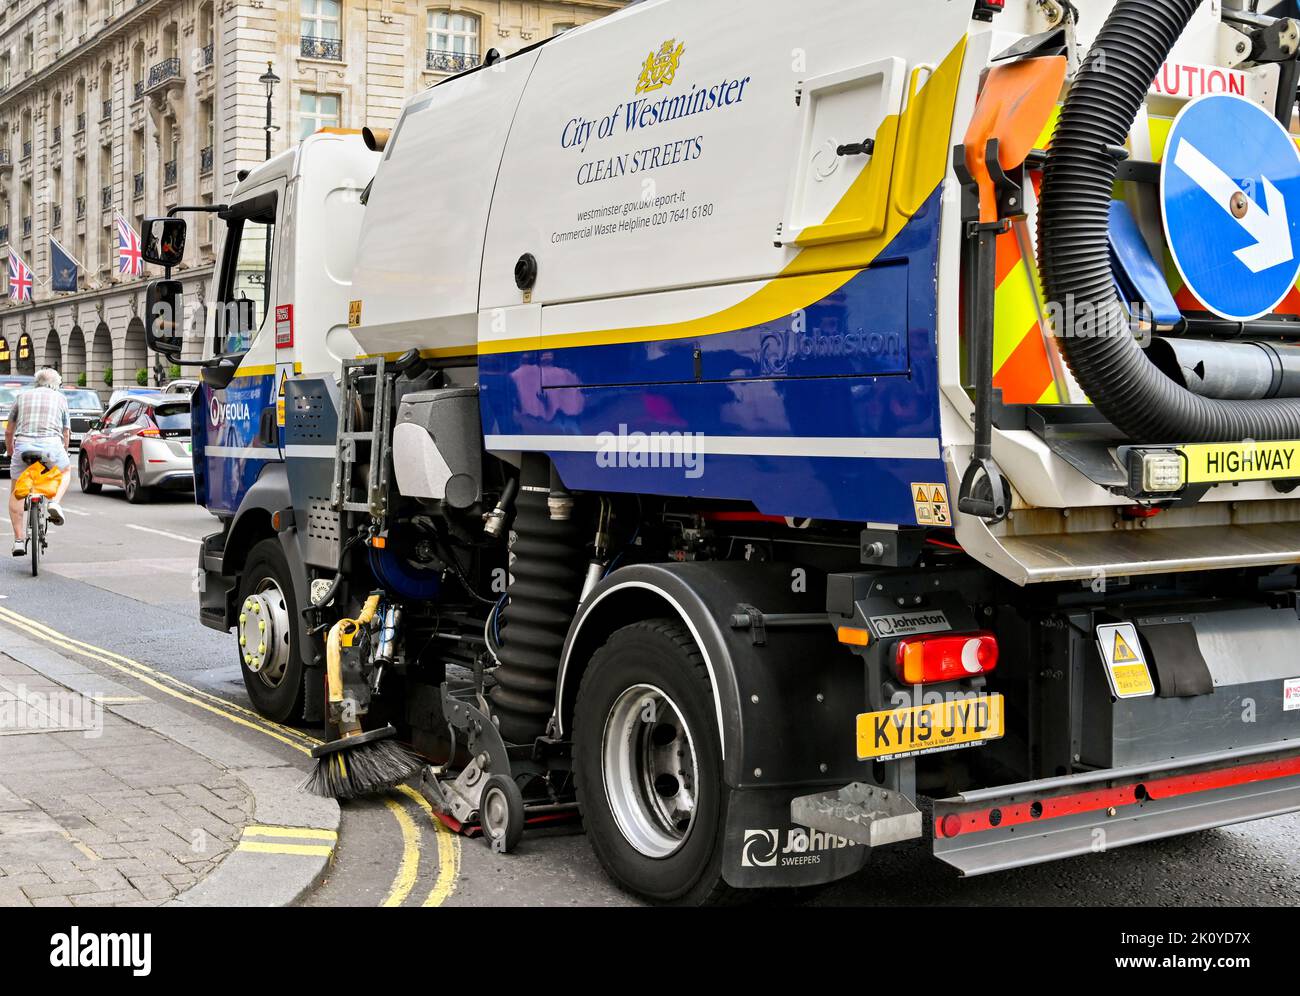 London, United Kingdom - June 2022: Street cleaning vehicle operated by City of Westminster council working on a street in central London Stock Photo